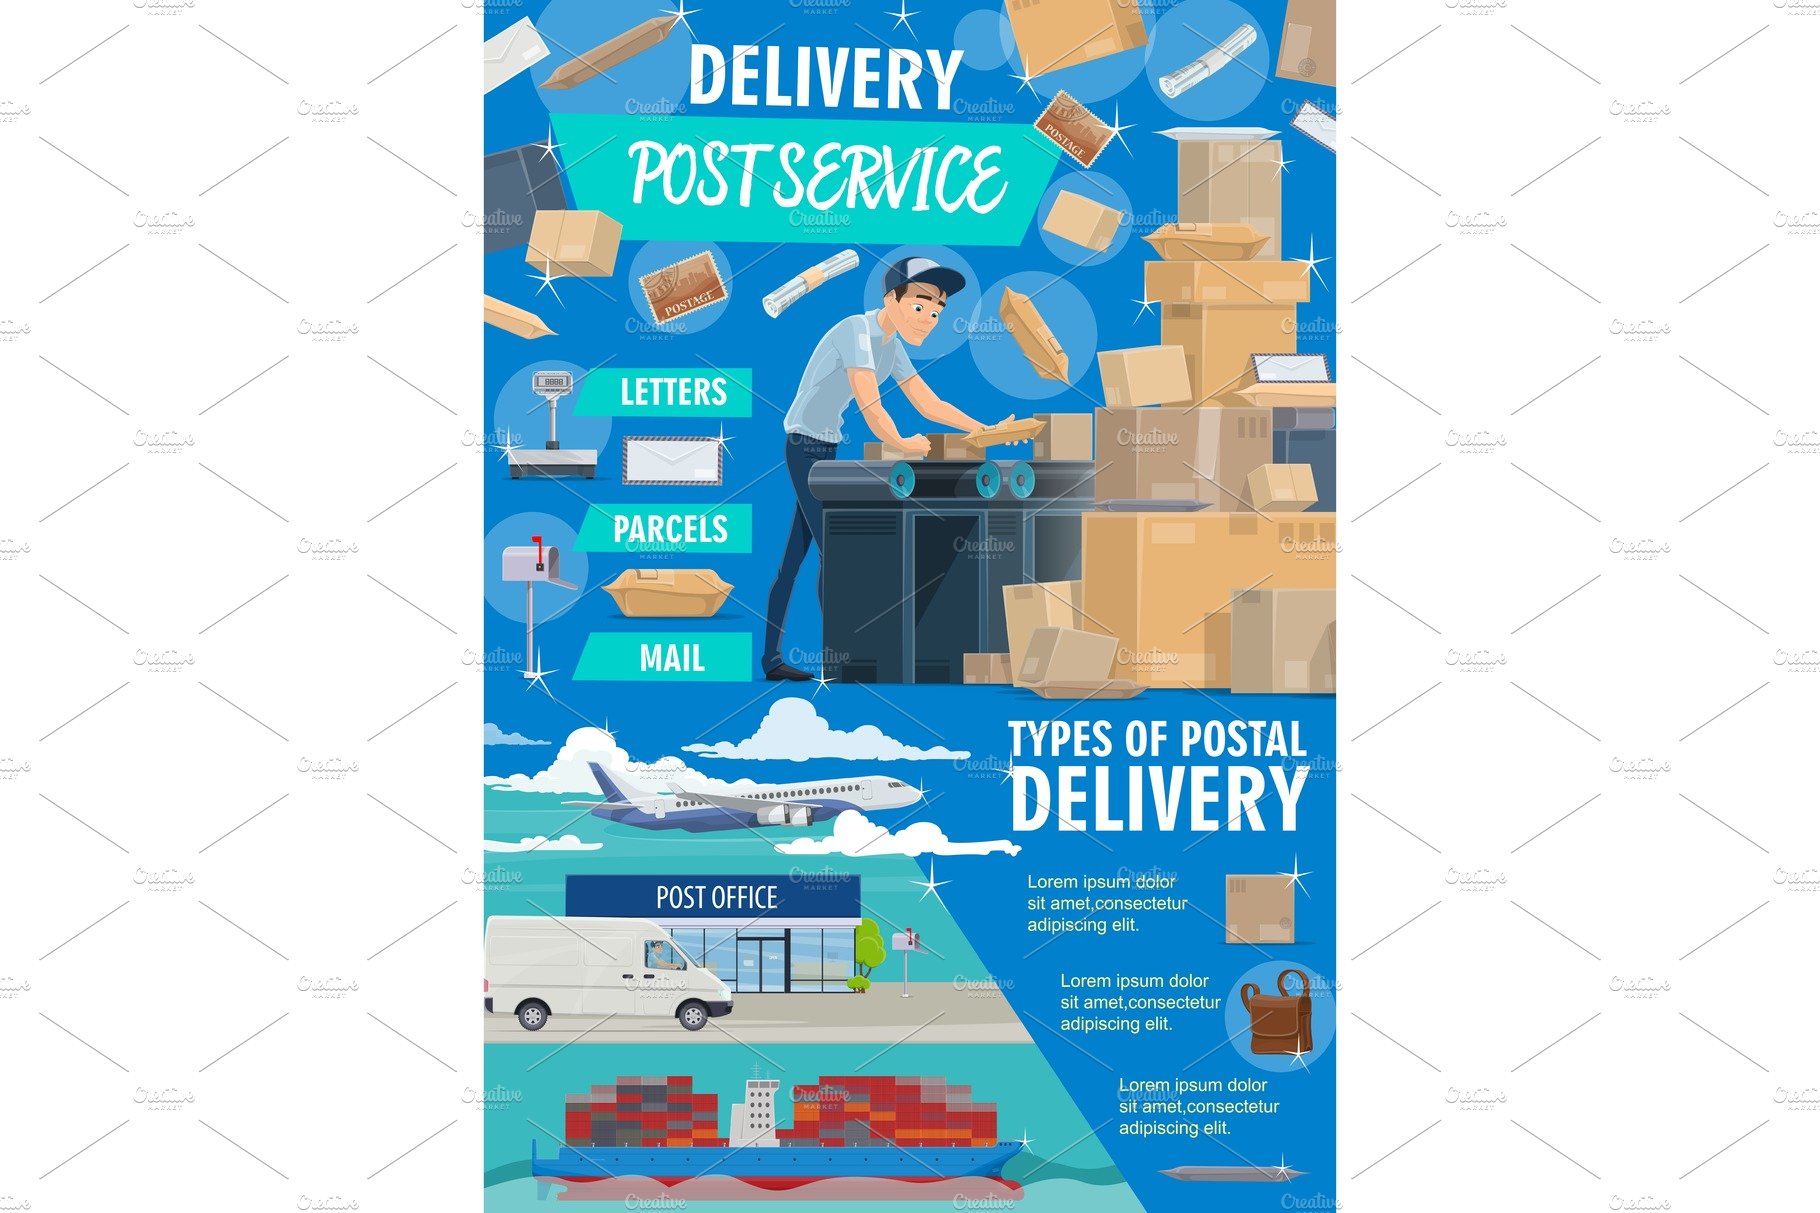 Post service delivery cover image.